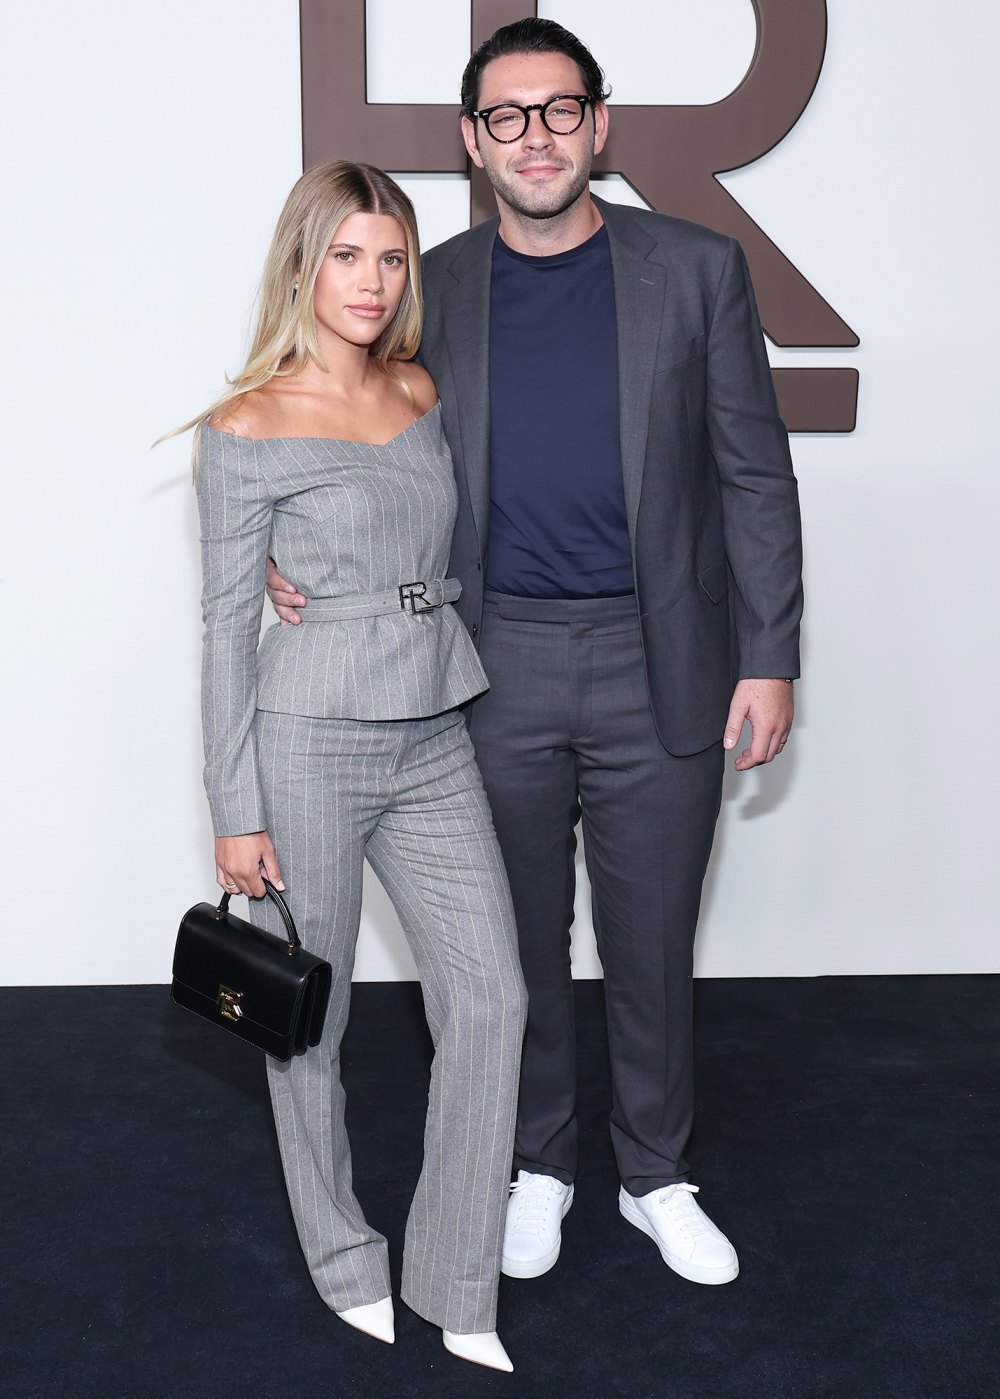 Sofia Richie Doesn't Plan to Buy Maternity Clothes